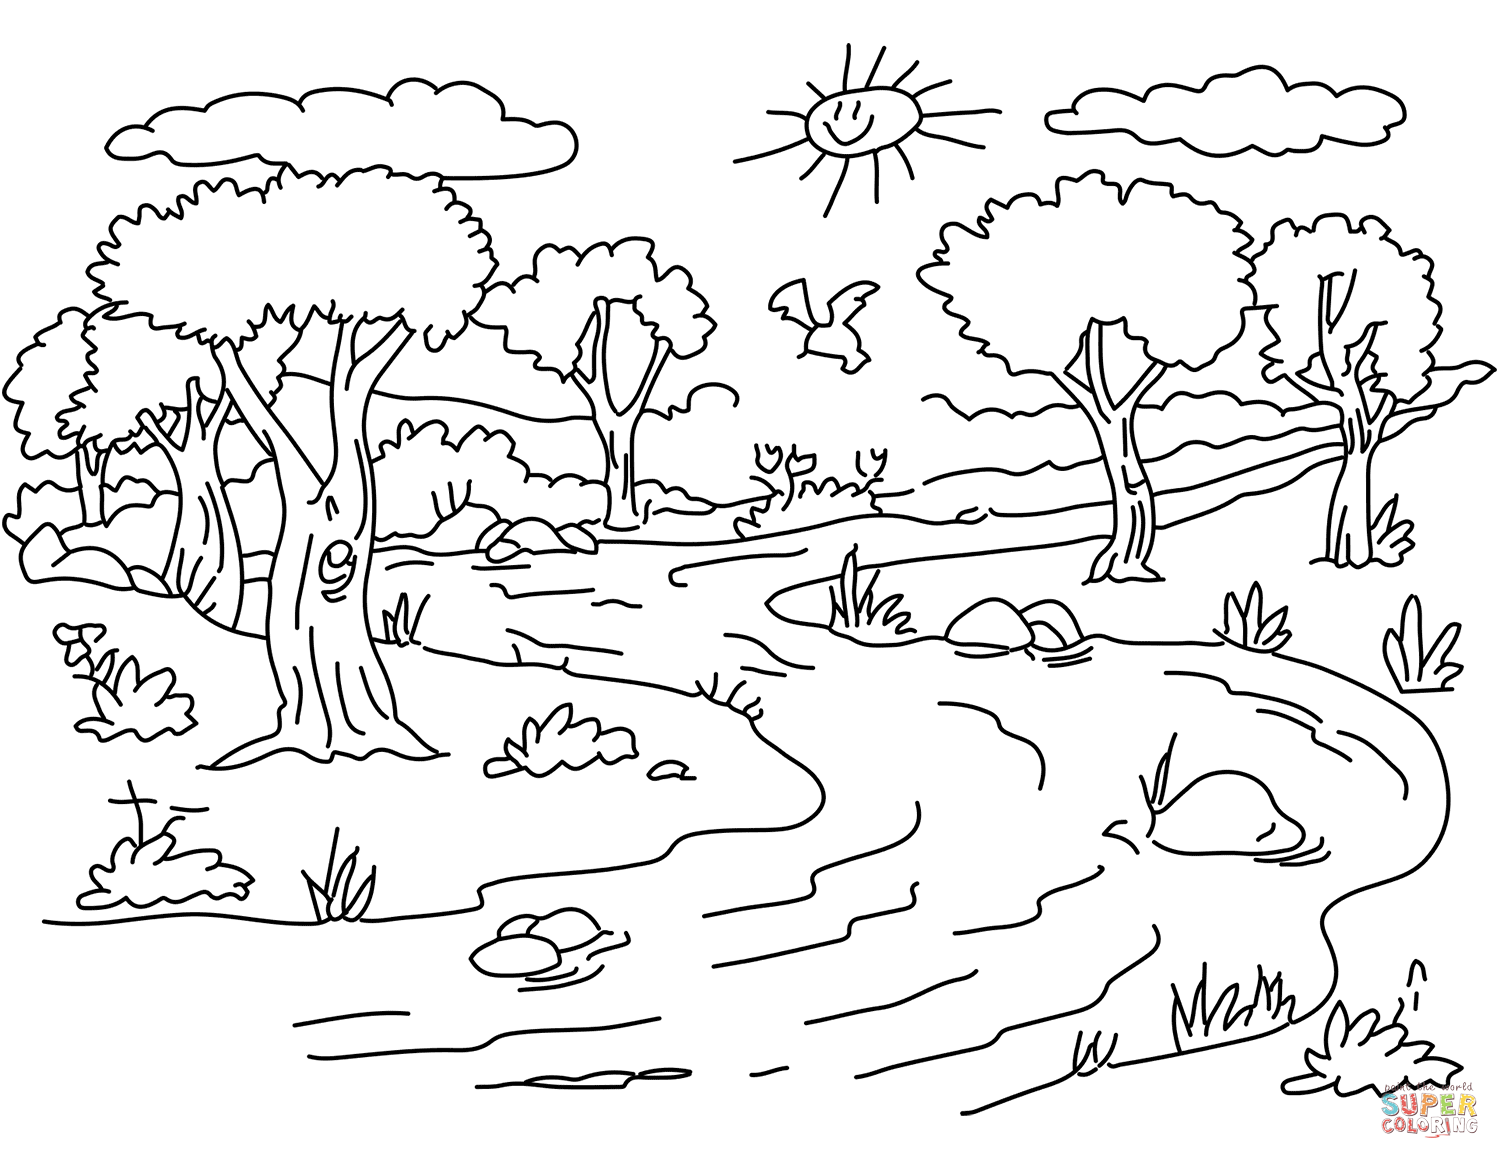 River Landscape coloring page | Free Printable Coloring Pages